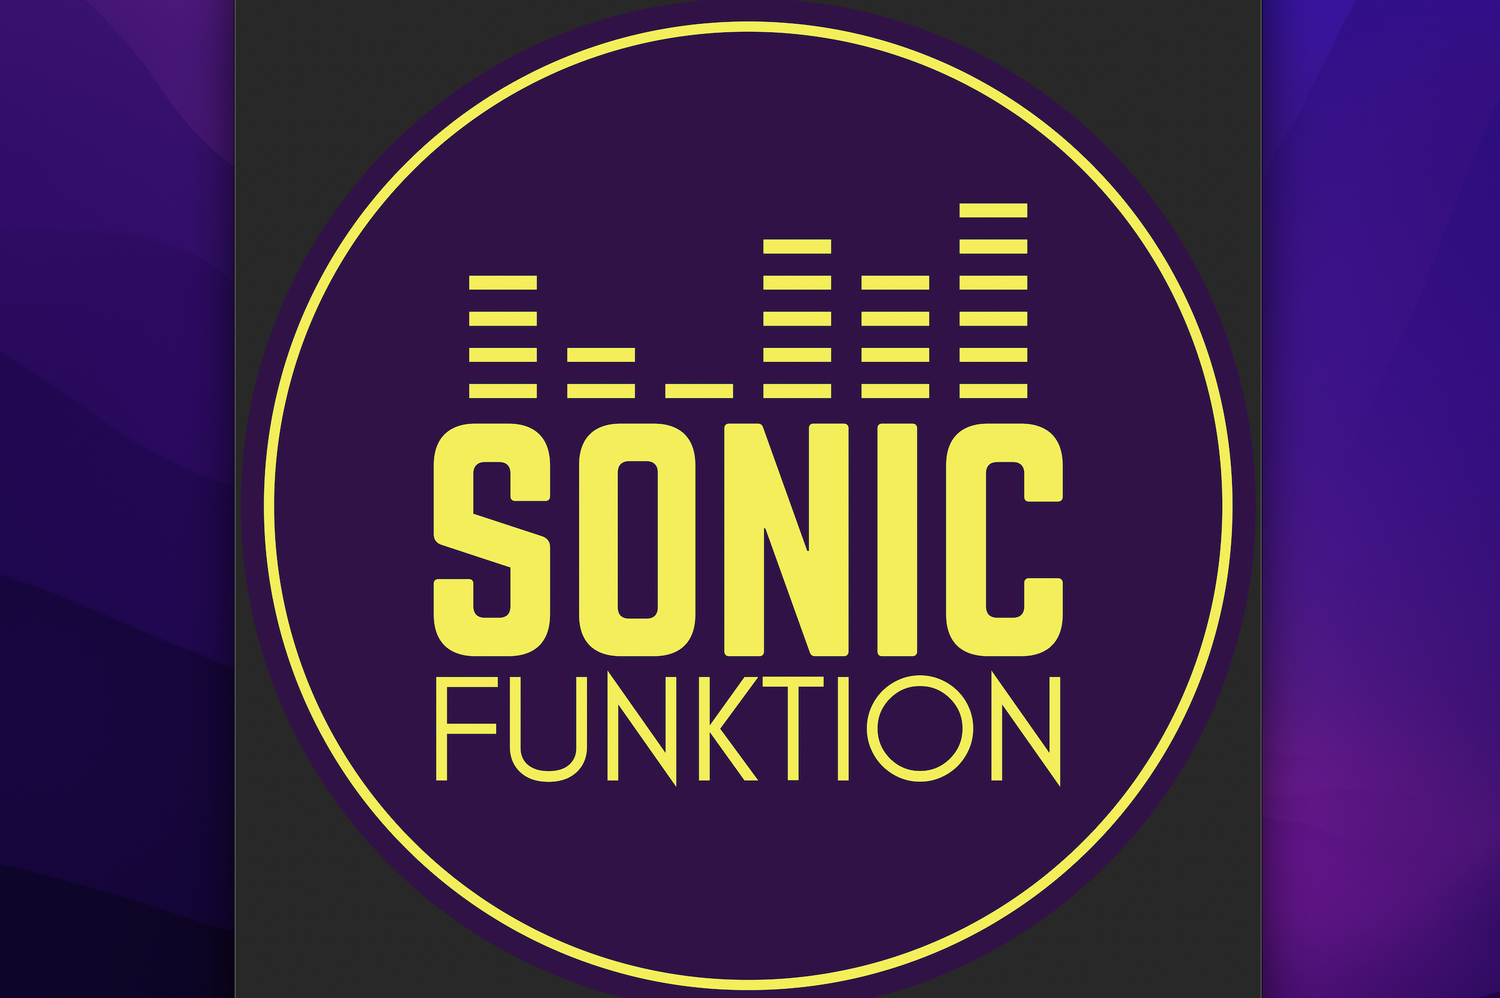 Sonic Funktion